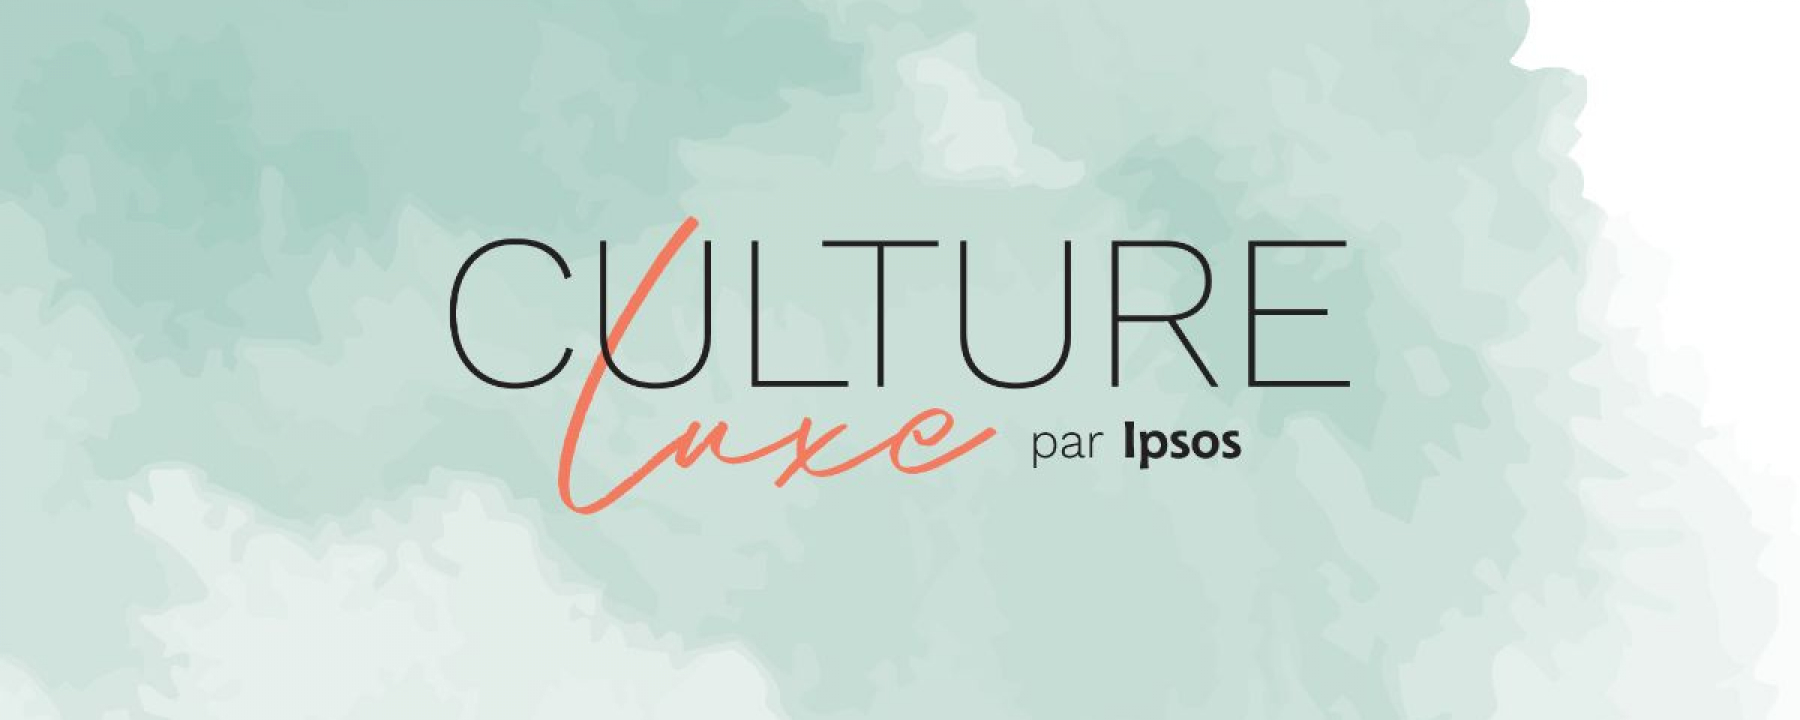 Culture luxe 